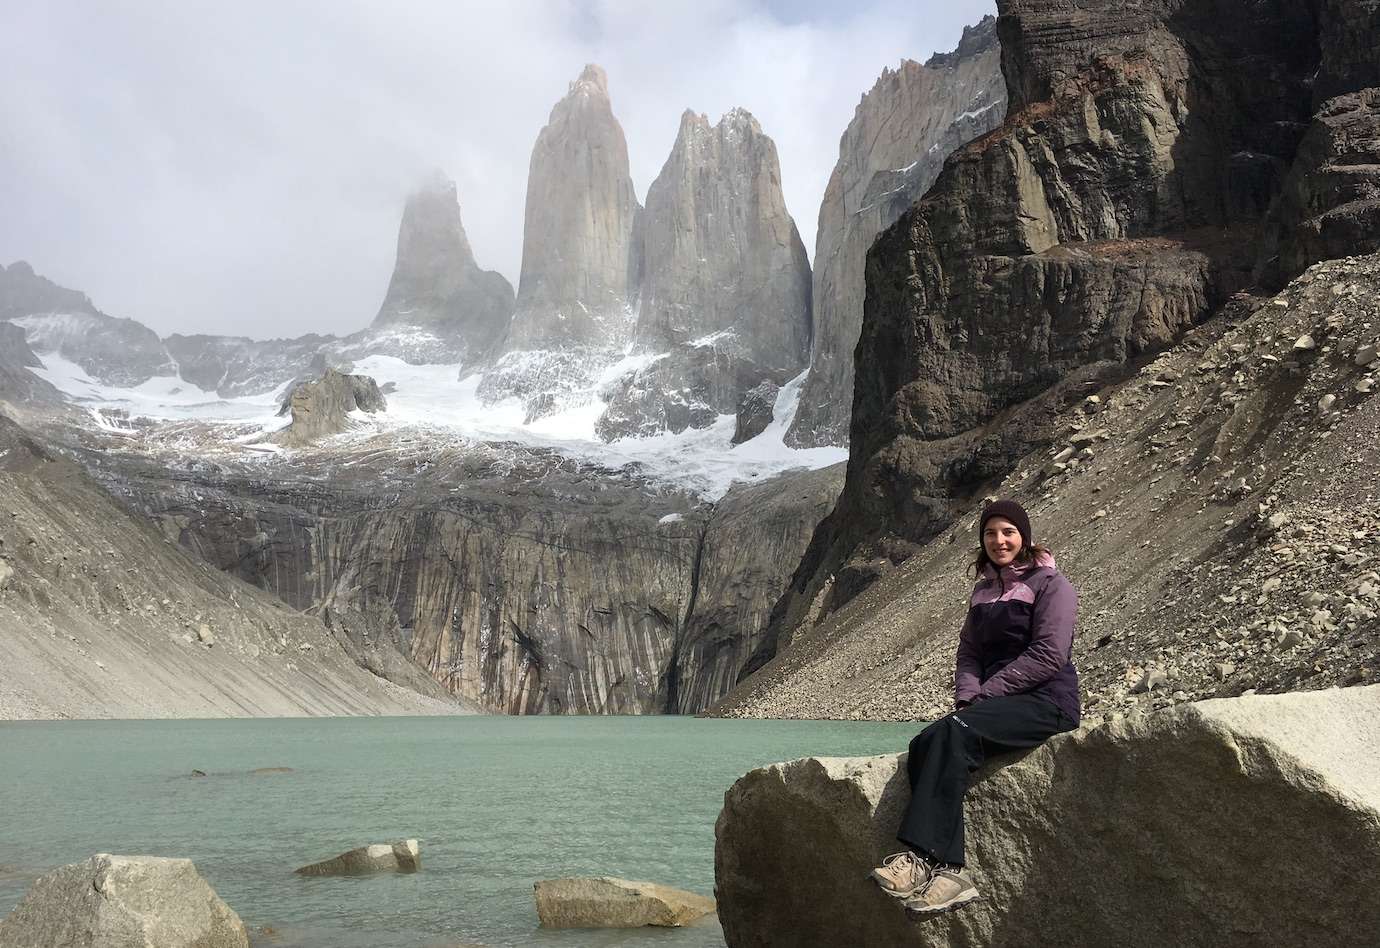 On this Day: Day 5 of W Trek in Torres Del Paine